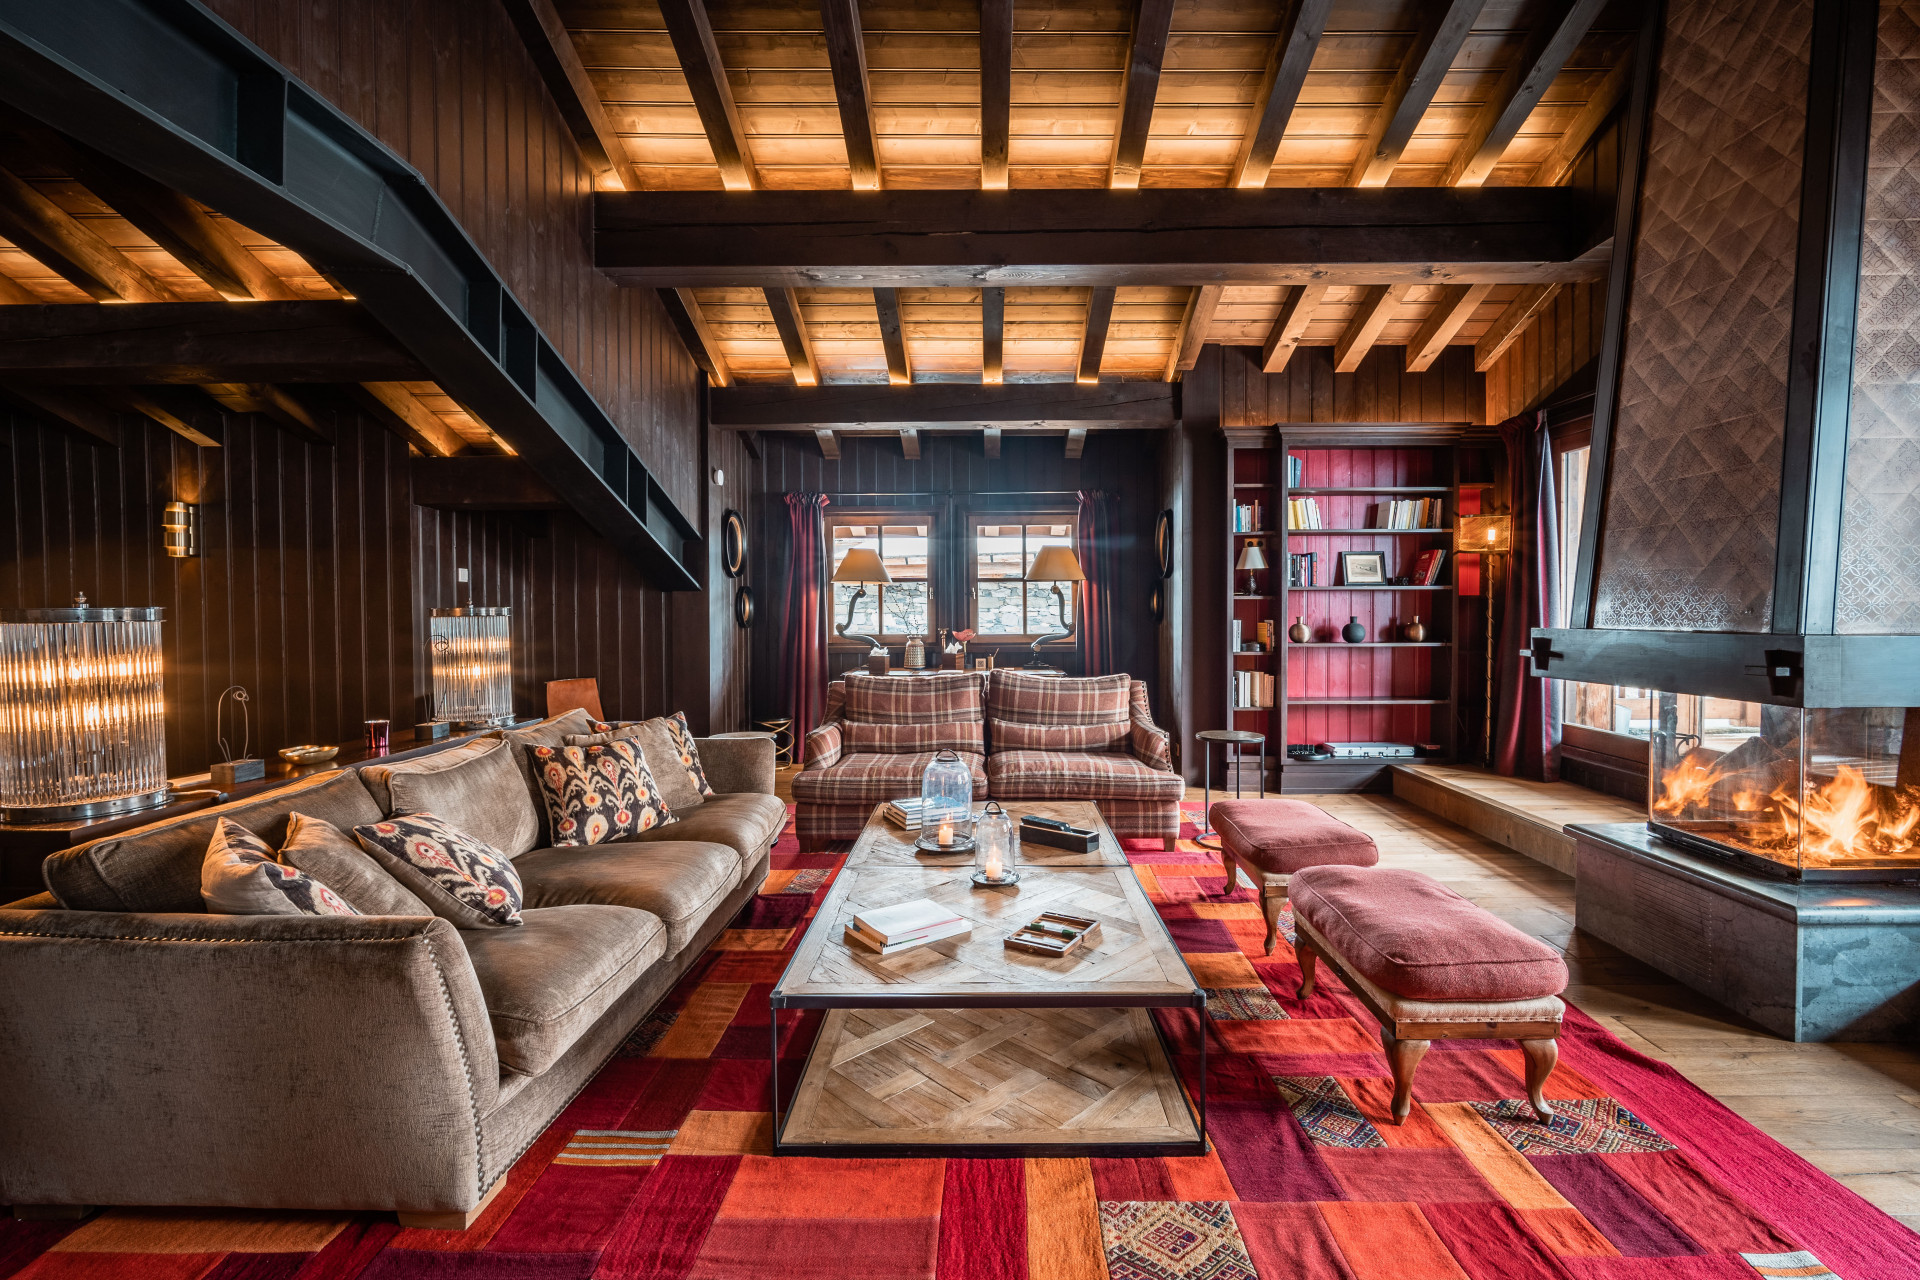 val-d-isere-location-chalet-luxe-venturini